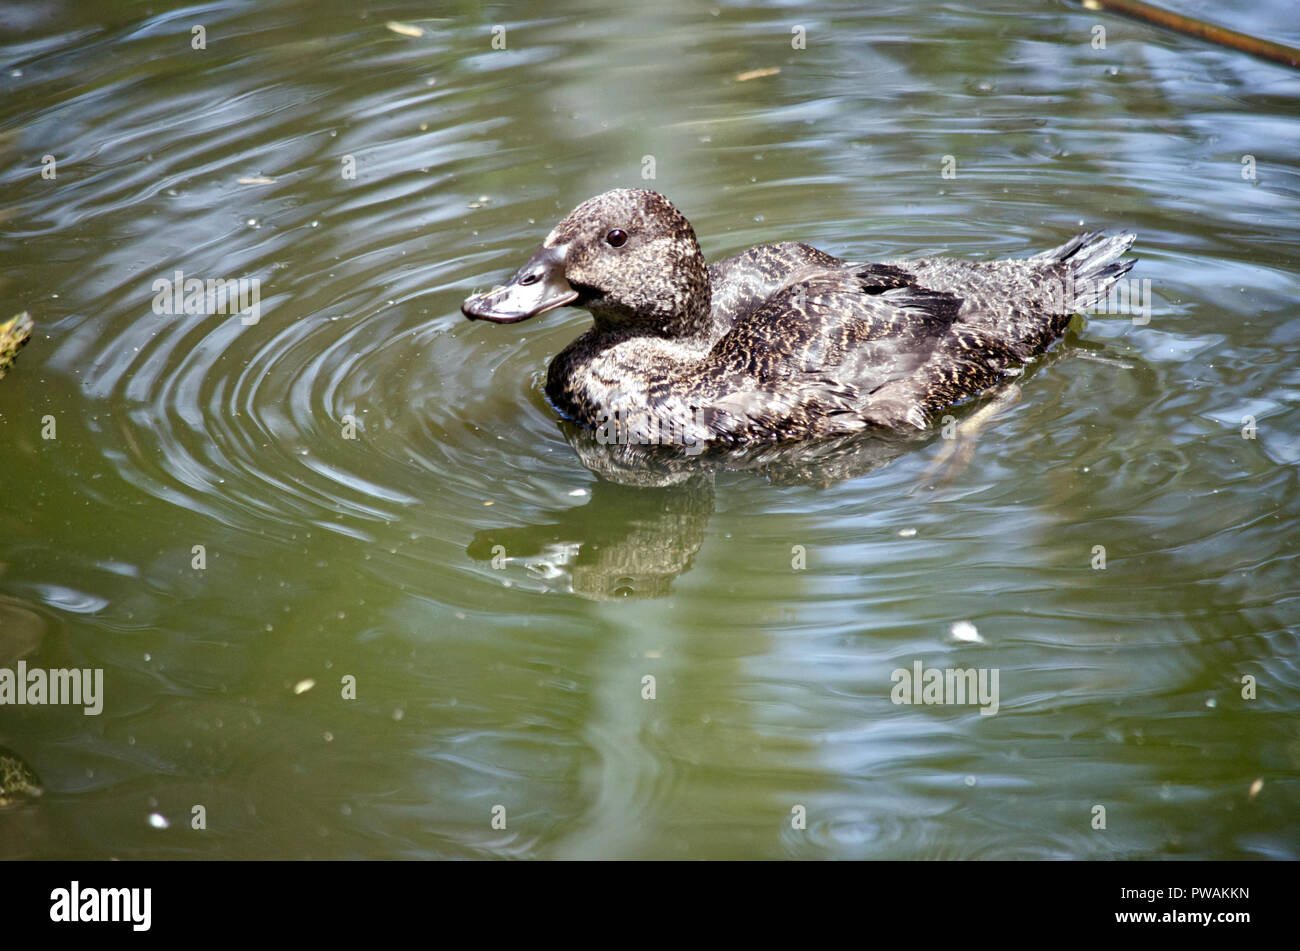 the freckled duck is swimming in a pond Stock Photo